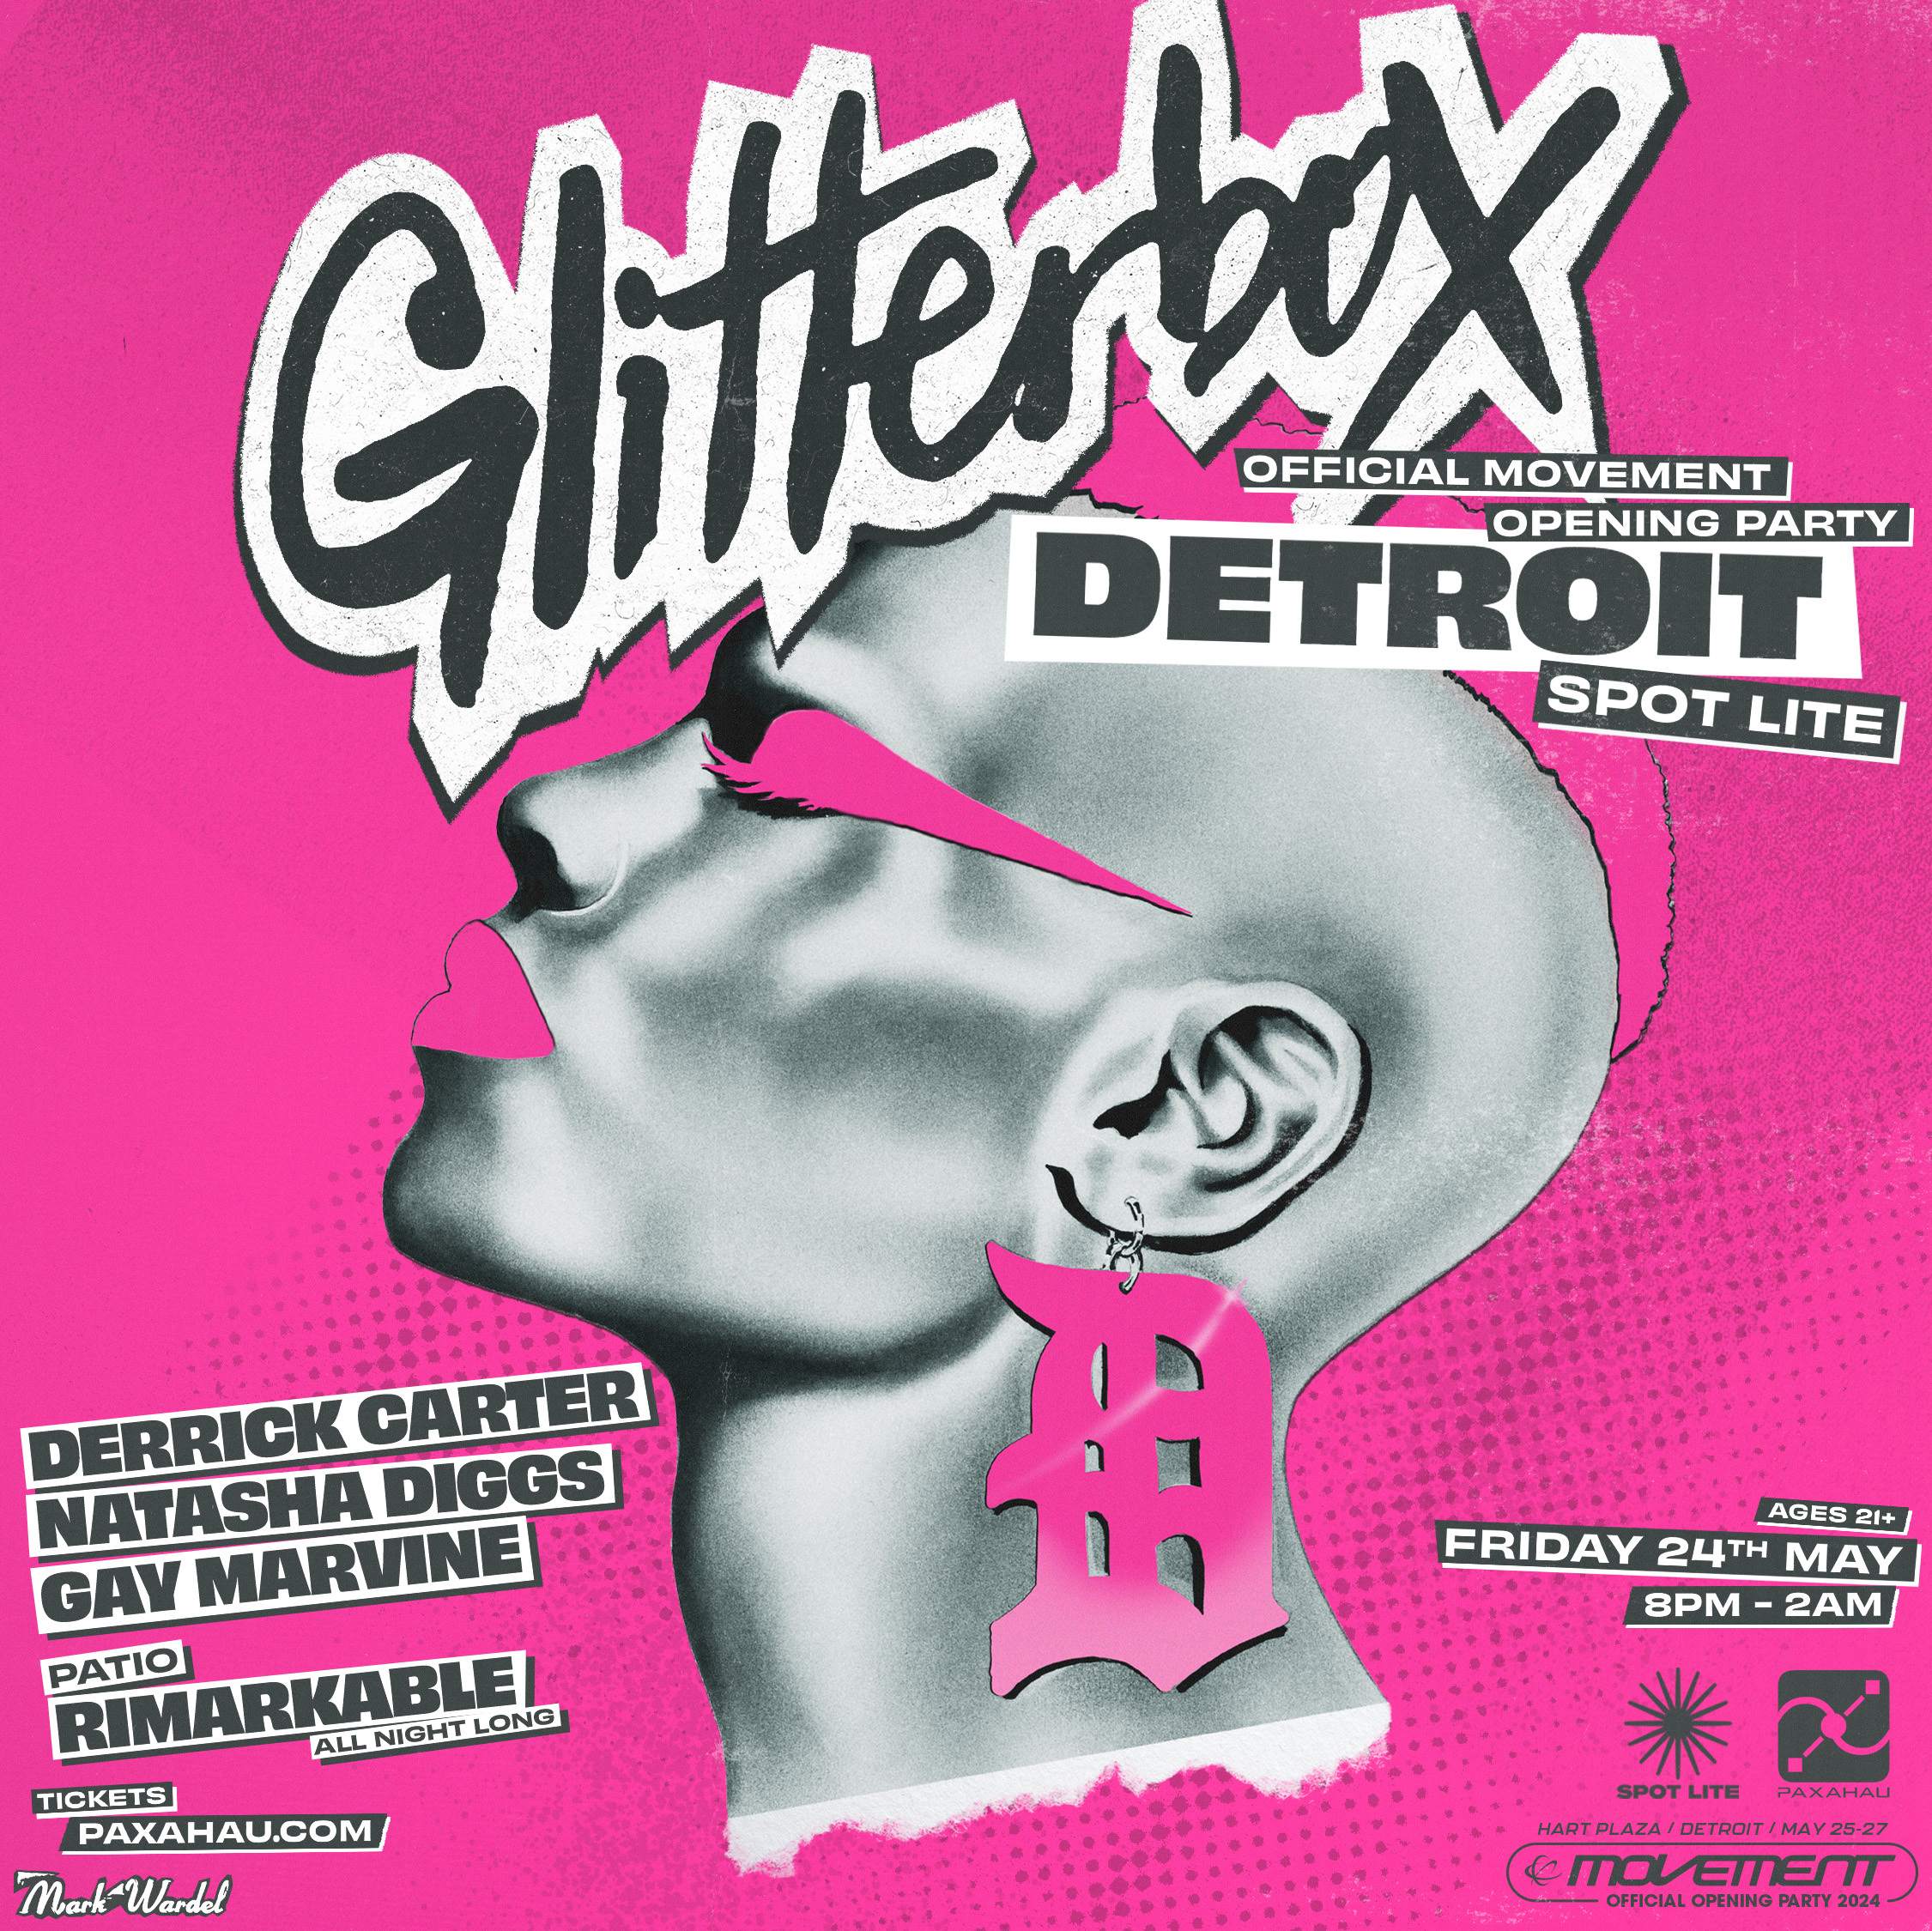 Glitterbox Detroit - Official Movement Opening Party - Página frontal